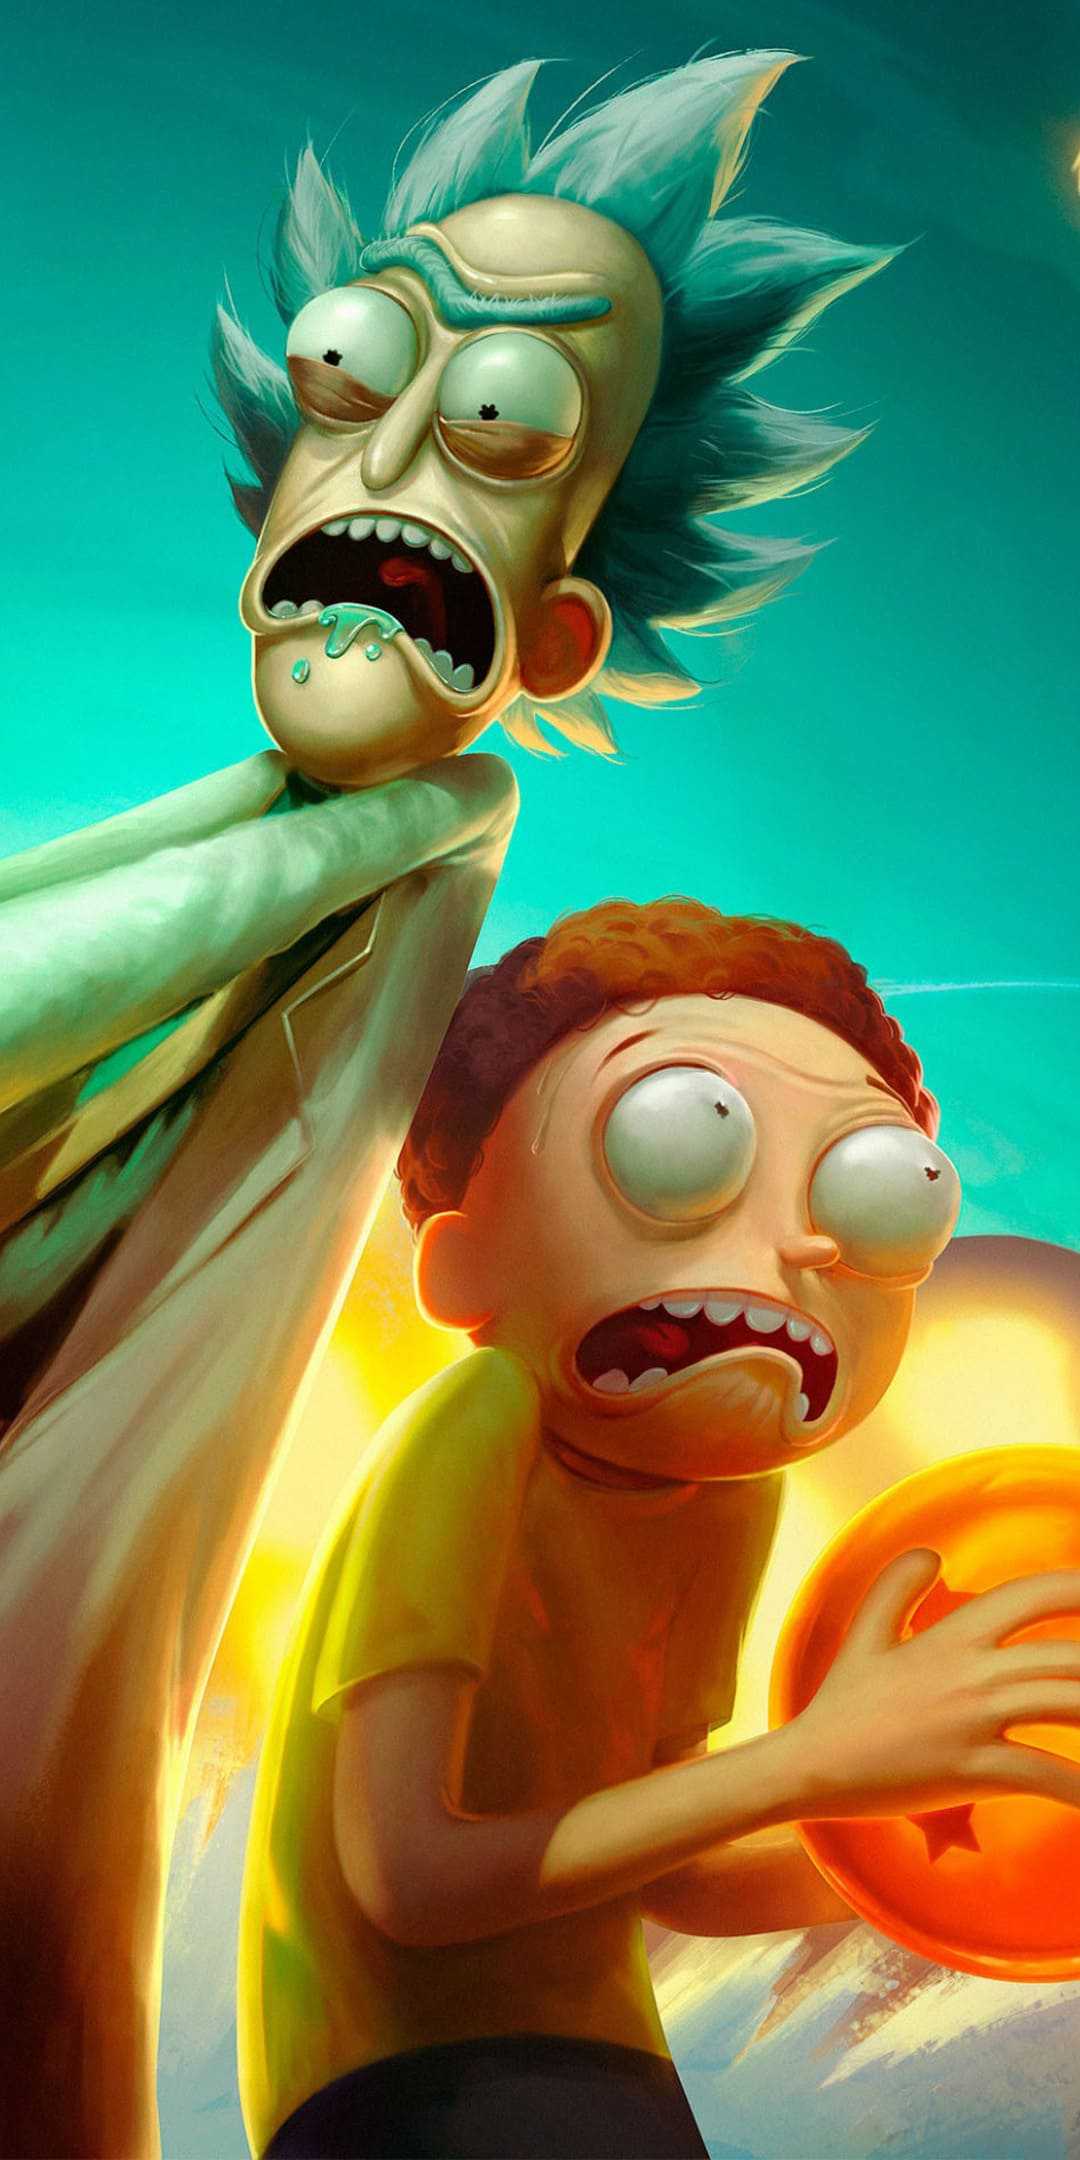 Rick and Morty Depressed Wallpapers - Top Free Rick and Morty Depressed ...